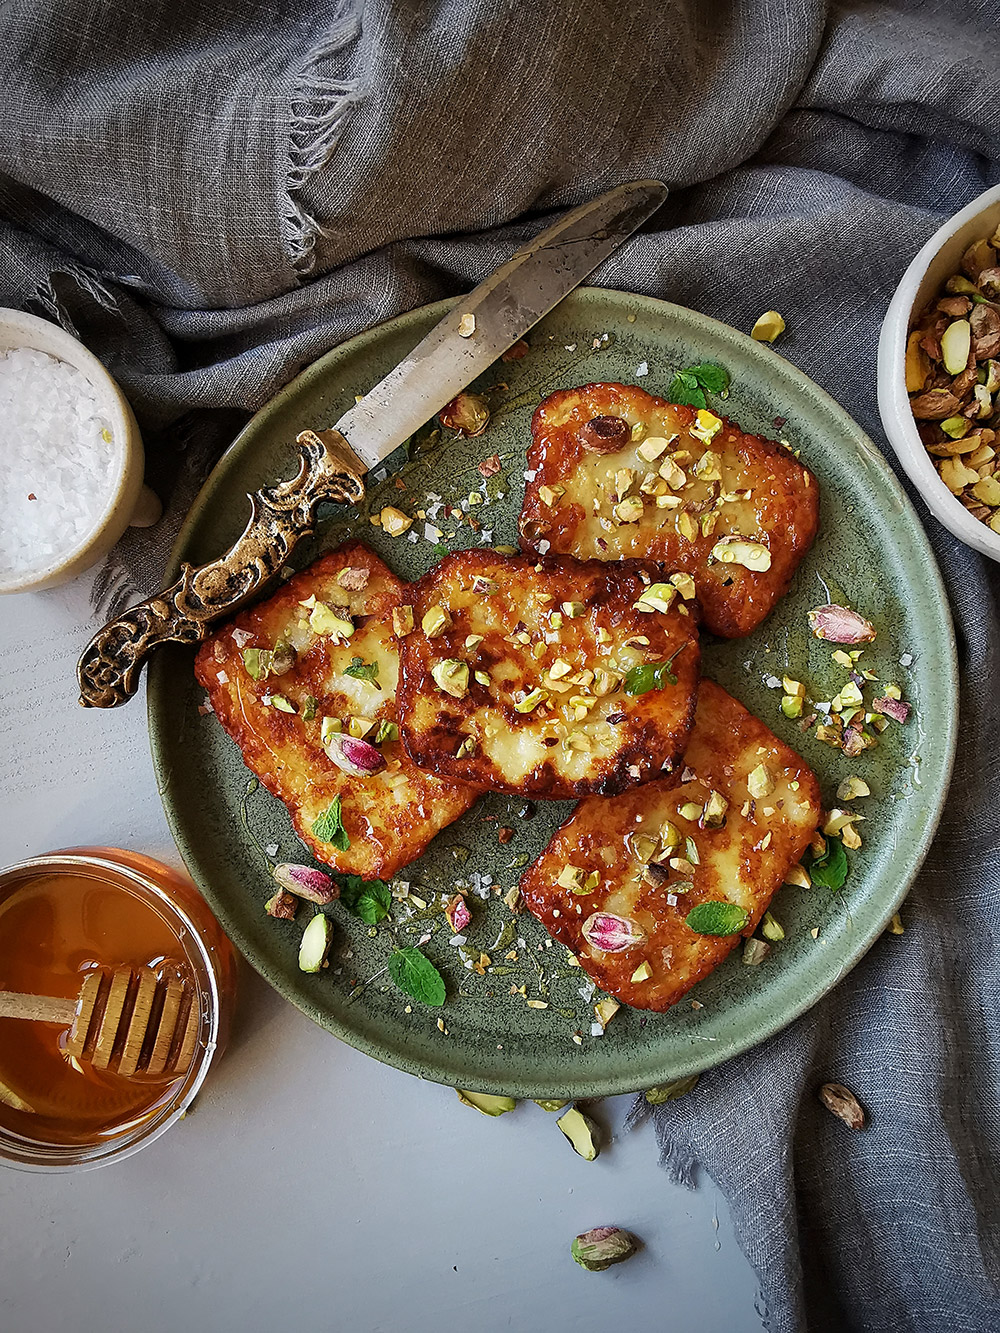 Fried to golden perfection halloumi